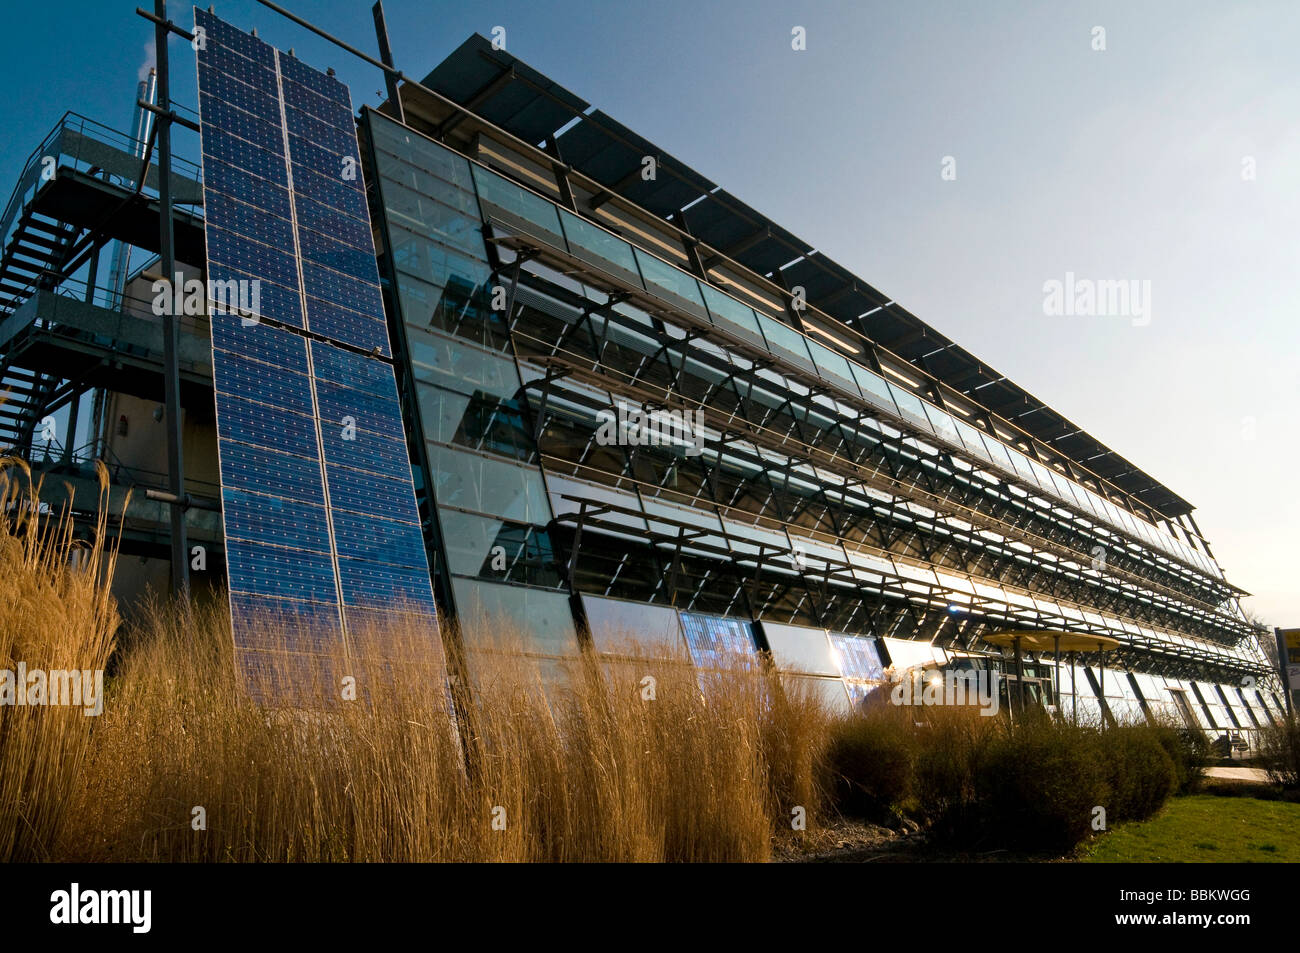 Industrial building with solar modules, Freiburg, Baden-Wuerttemberg, Germany Stock Photo